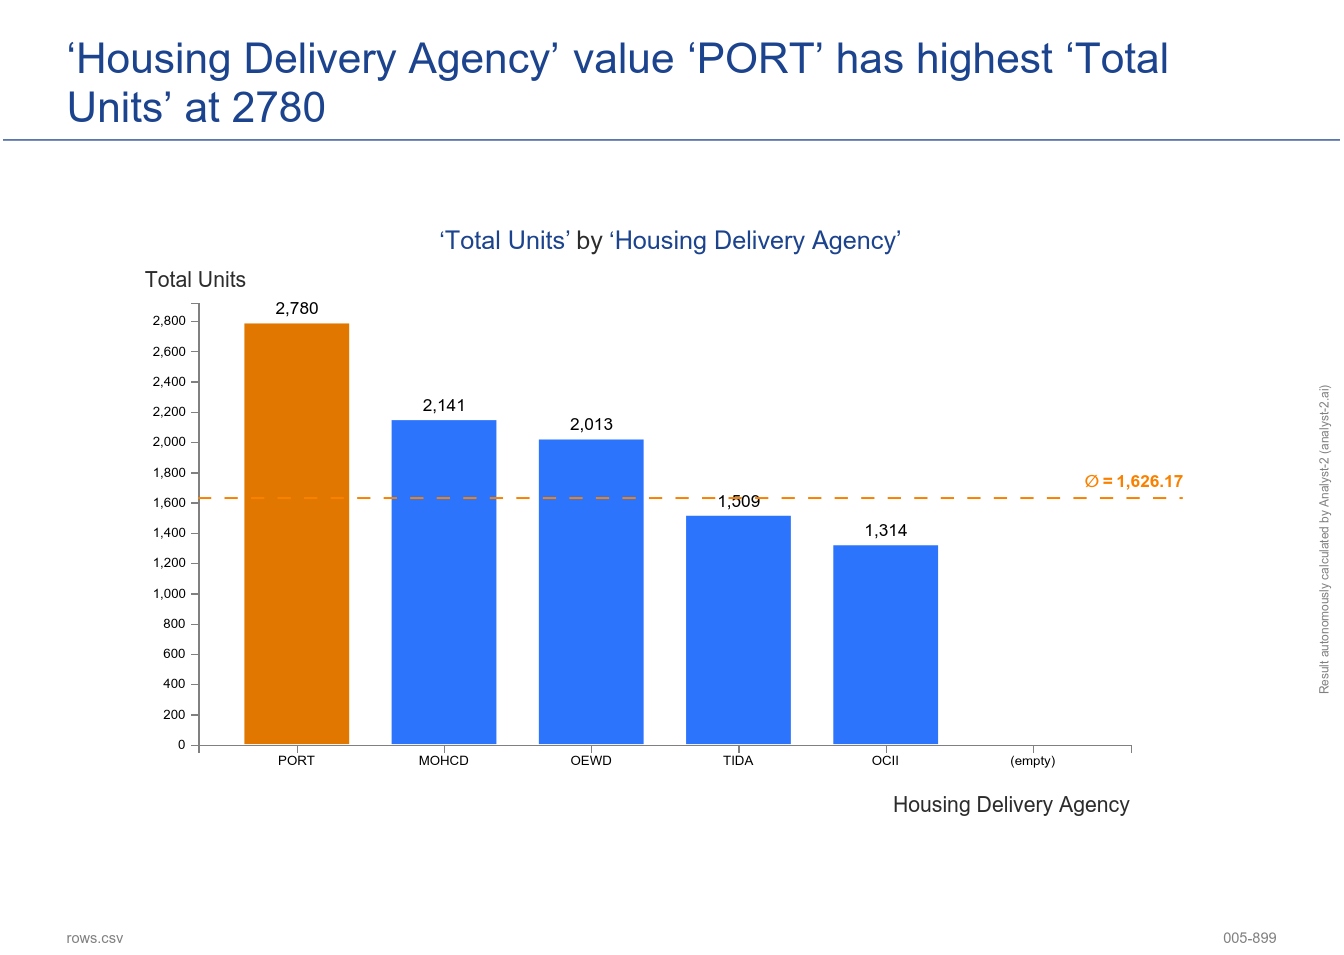 The ‘Housing Delivery Agency’ value ‘PORT’ has the highest ‘Total Units’ at 2780. ([DRAFT] Priority Permits - 005-899)